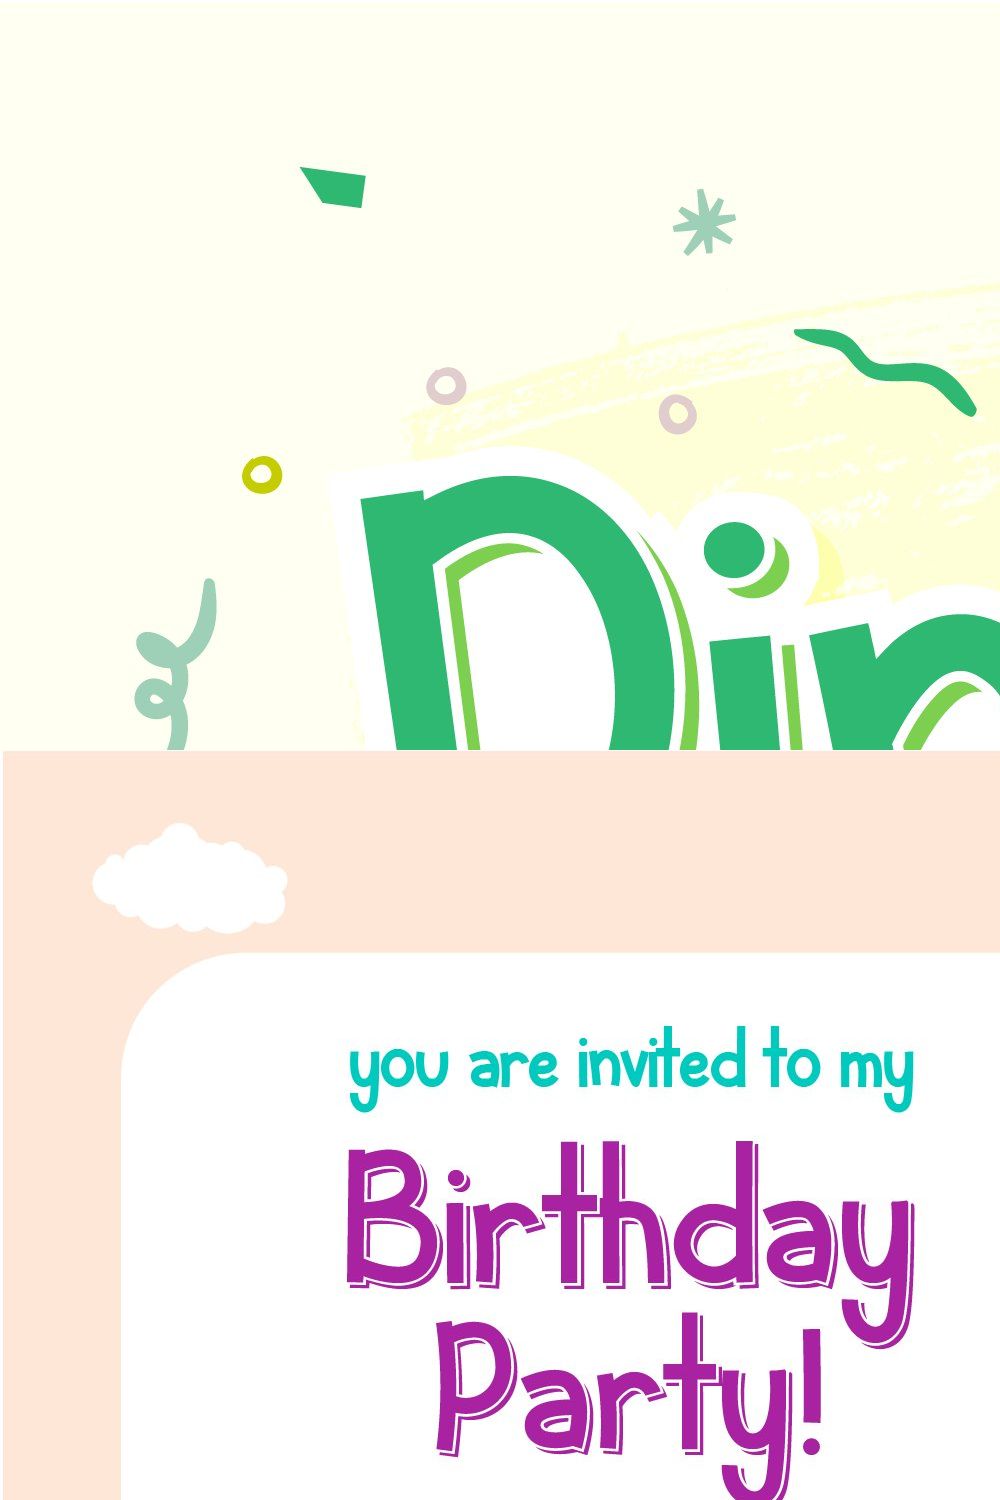 Dinoko - Cute layered font with dino pinterest preview image.